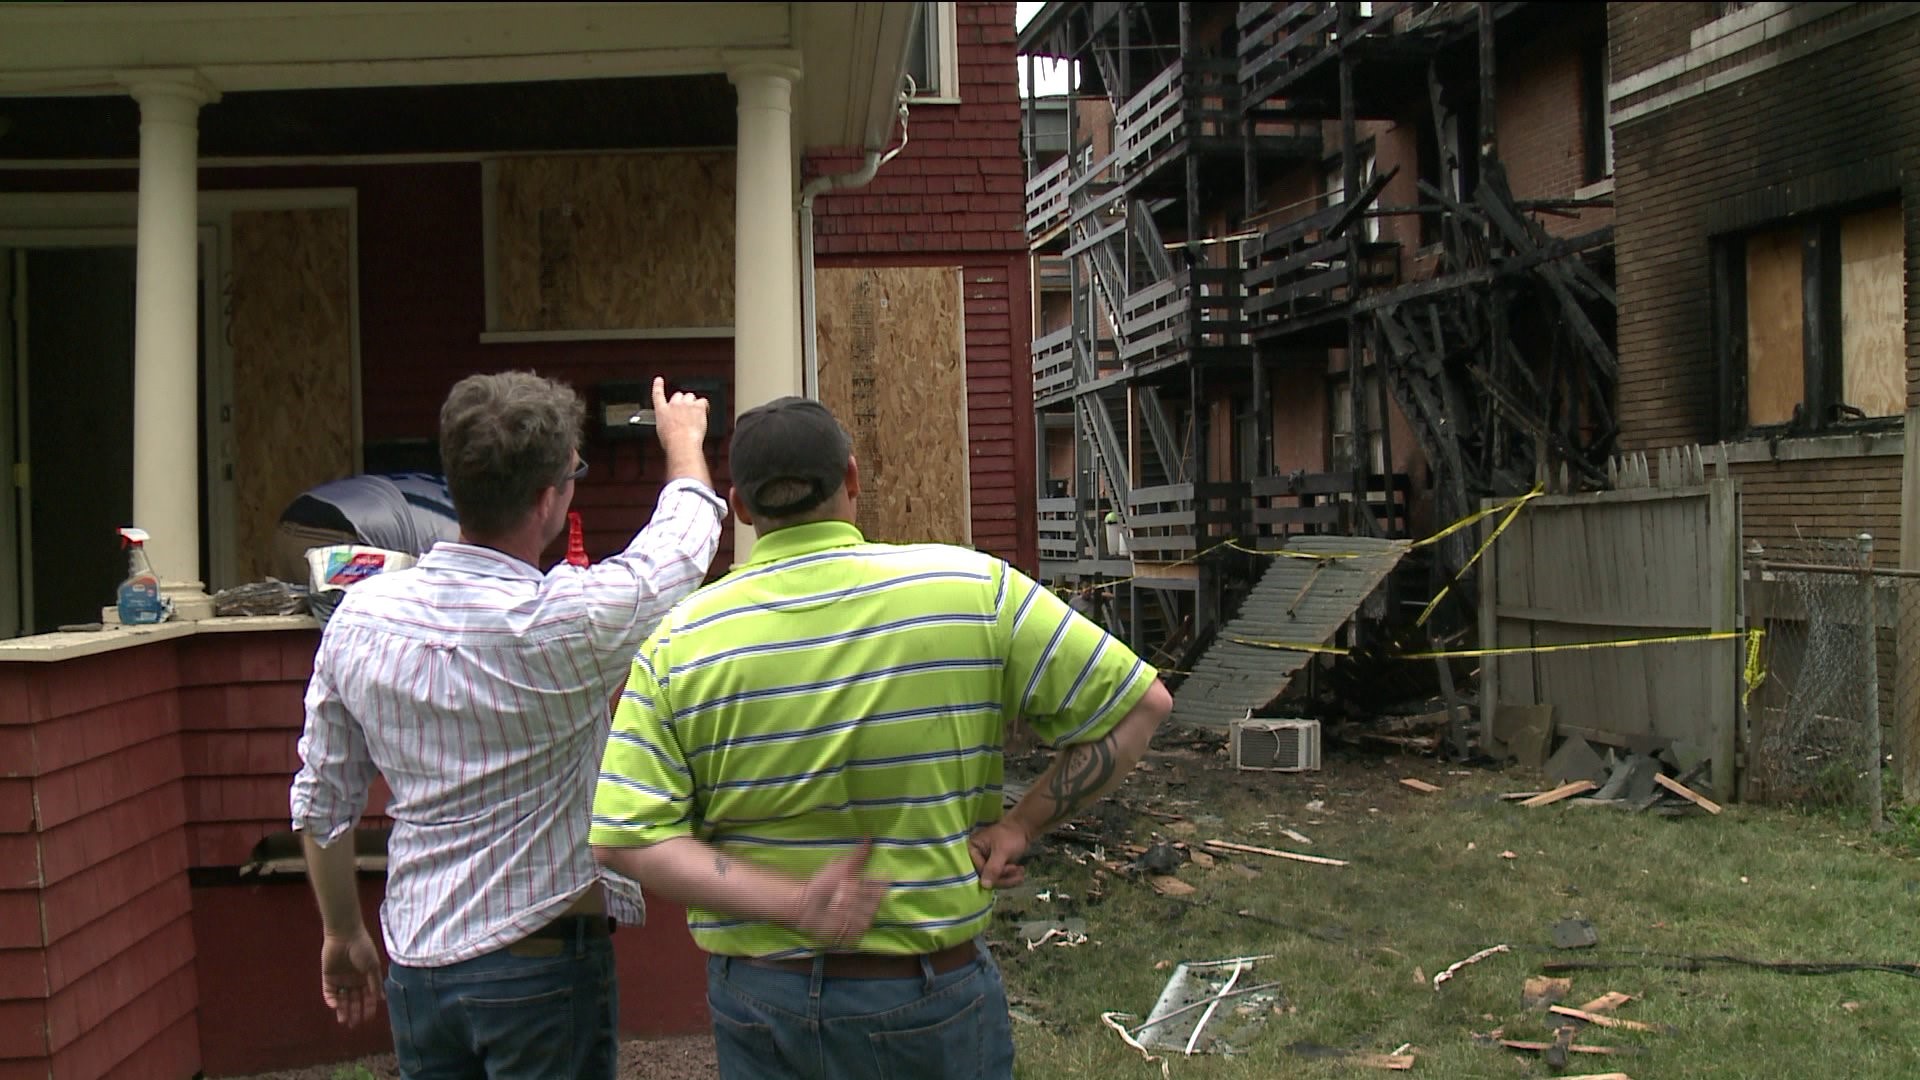 Dozens struggling to find answers after Hartford fire destroys two housing buildings